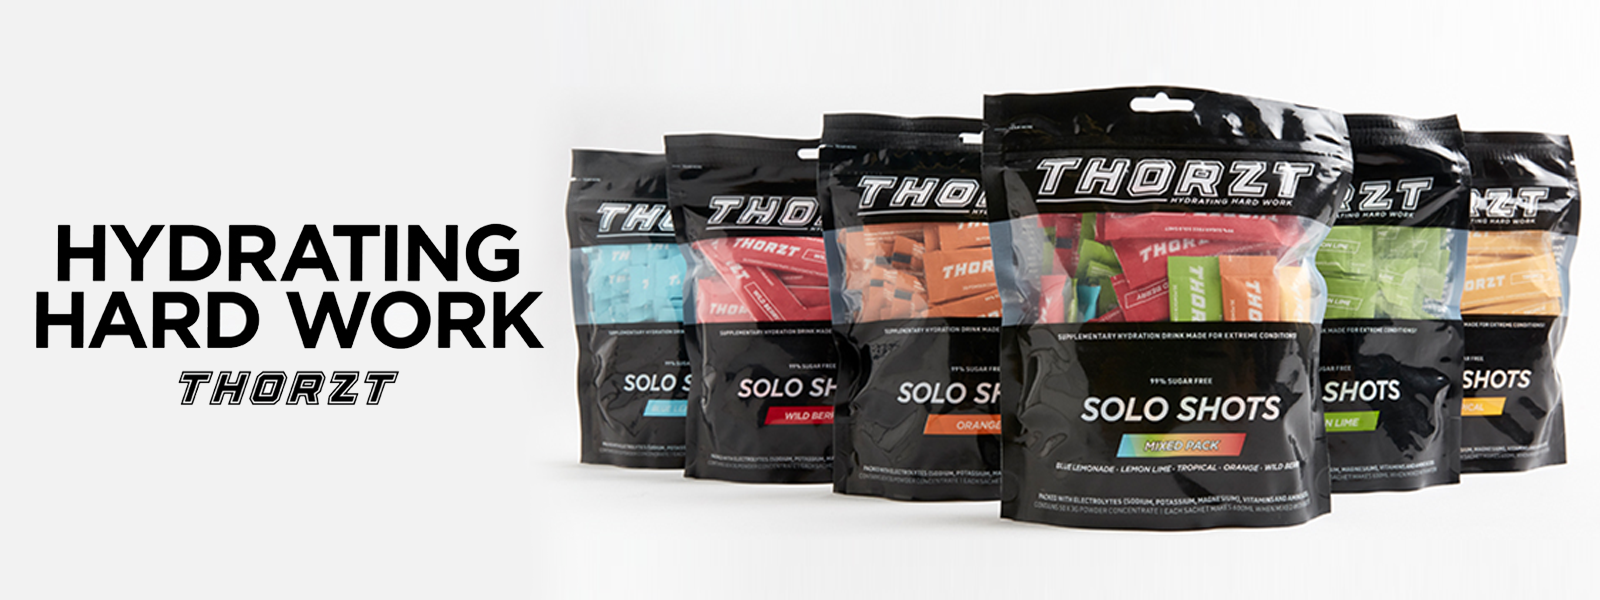 Thorzt - Hydrating Hard Work. Another premium quality Pac Fire brand.